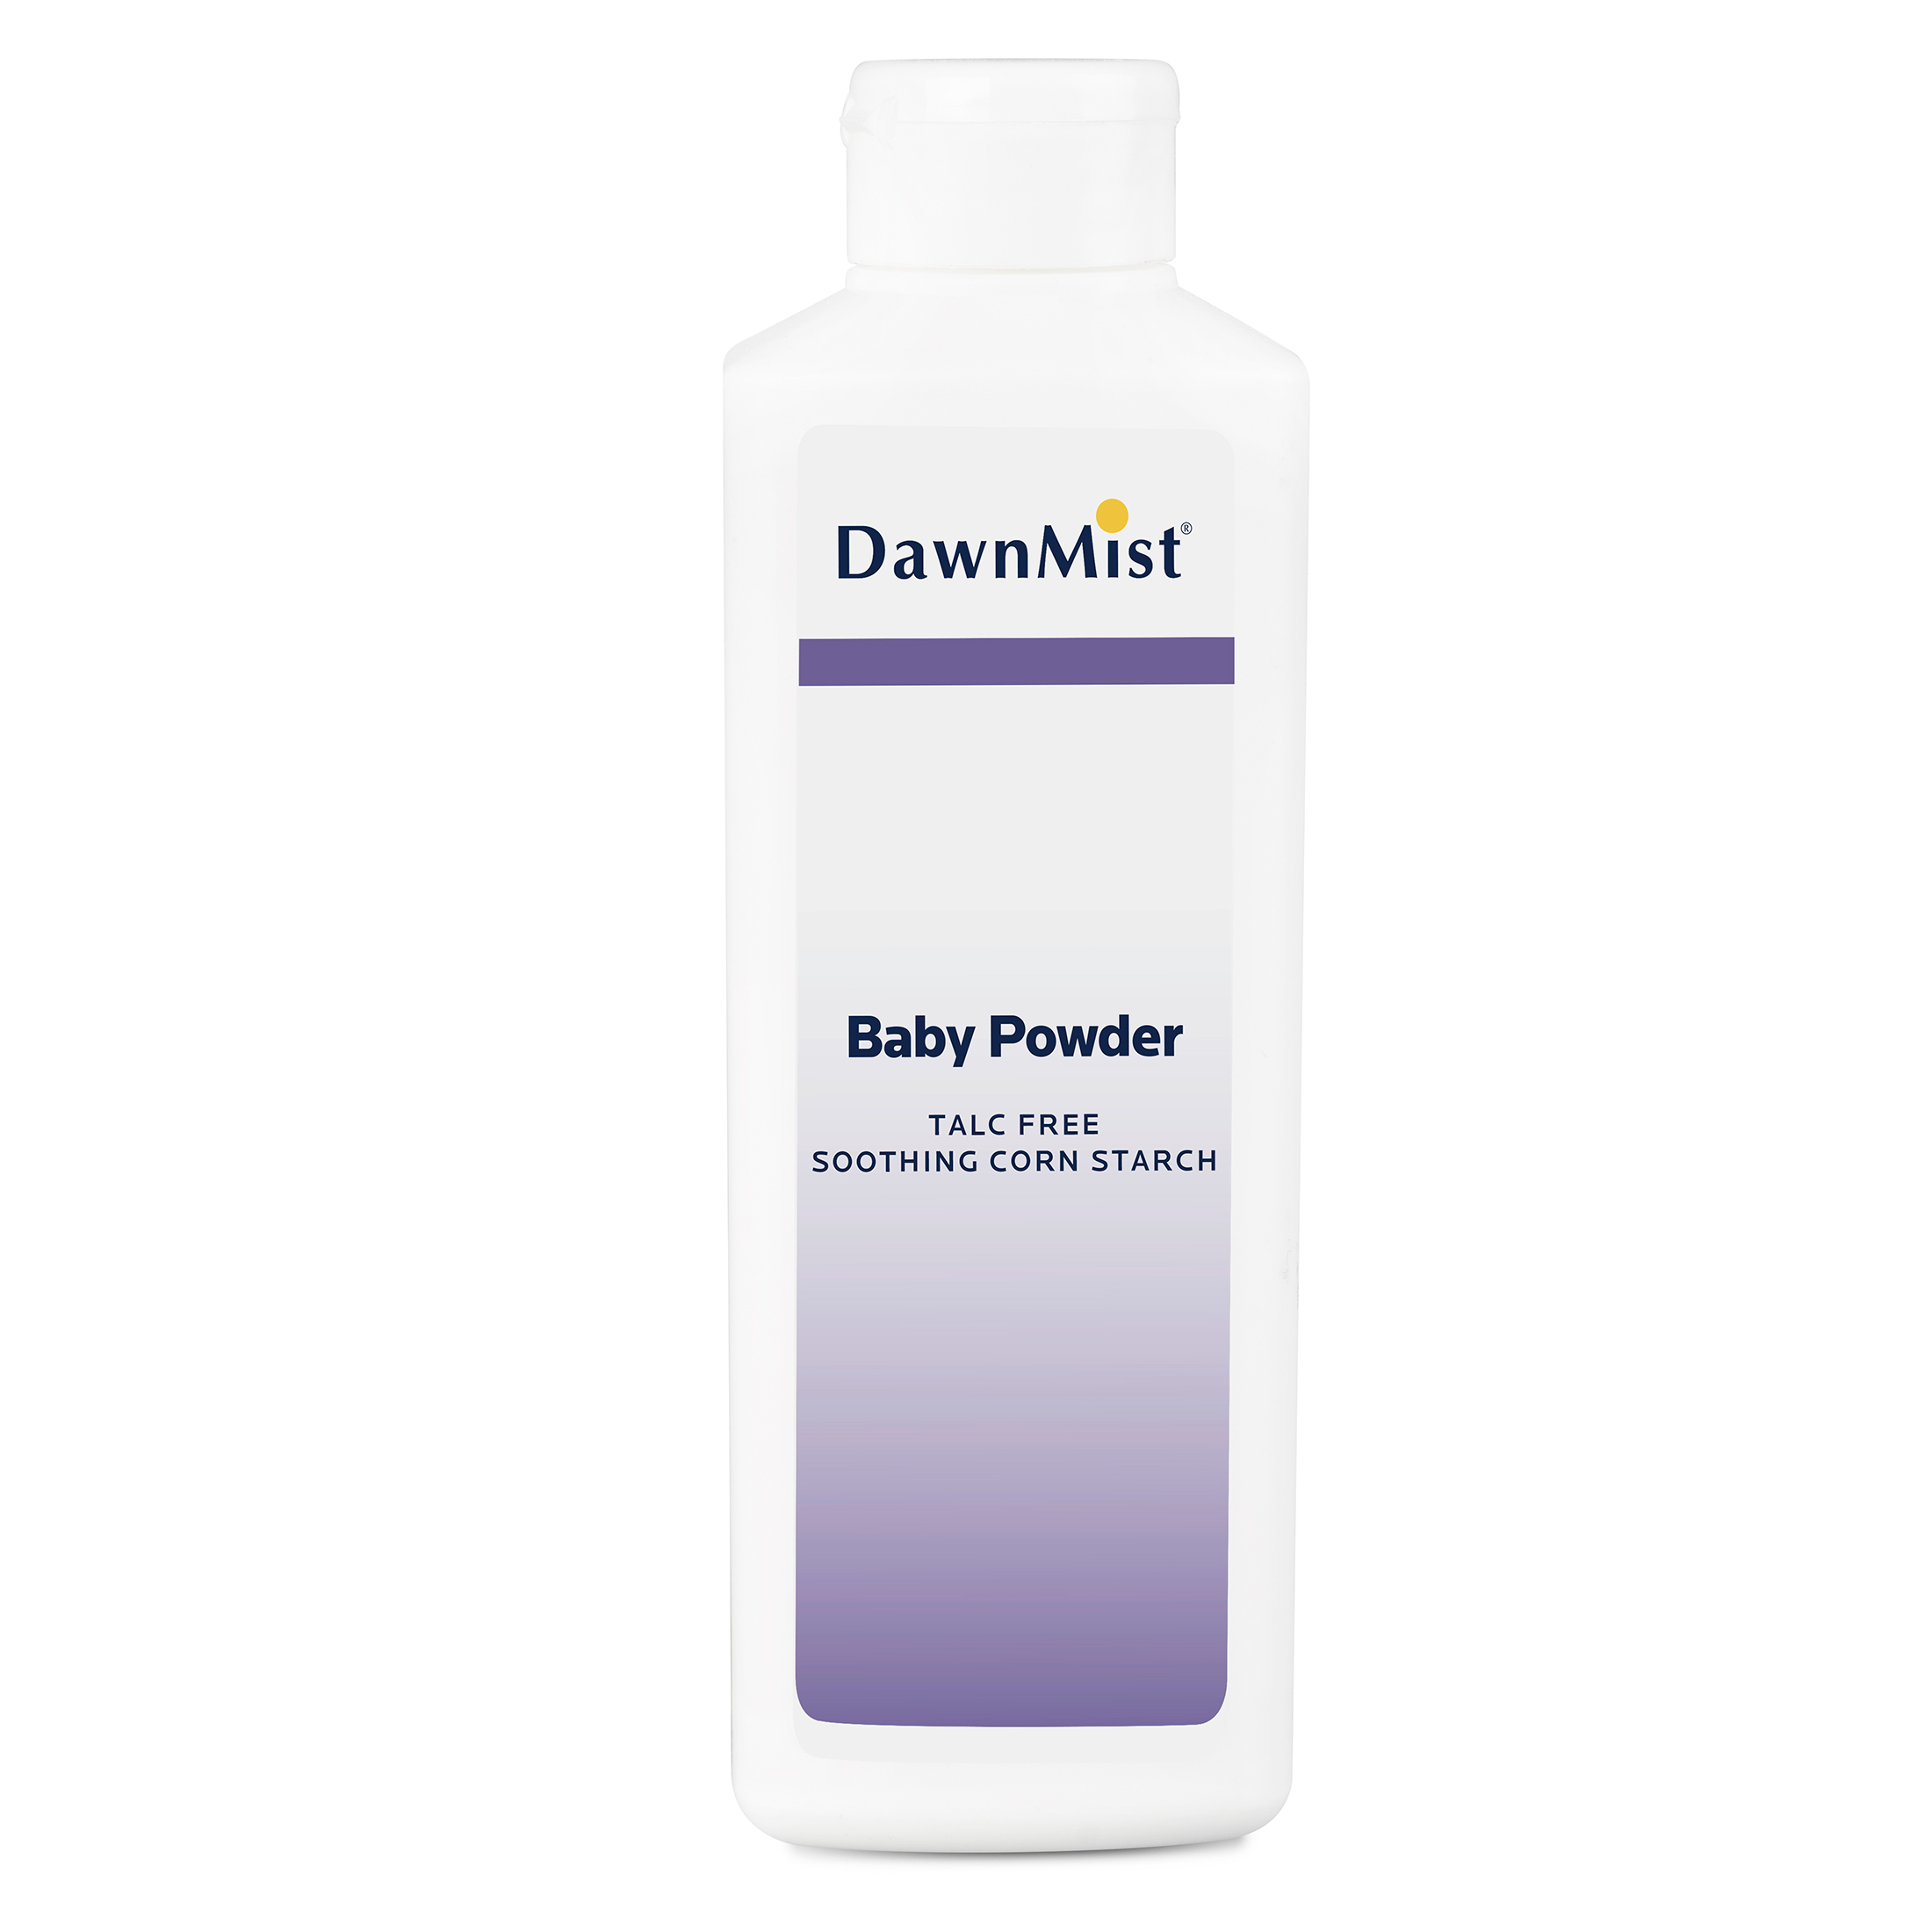 Baby Powder, with Cornstarch Products, Supplies and Equipment